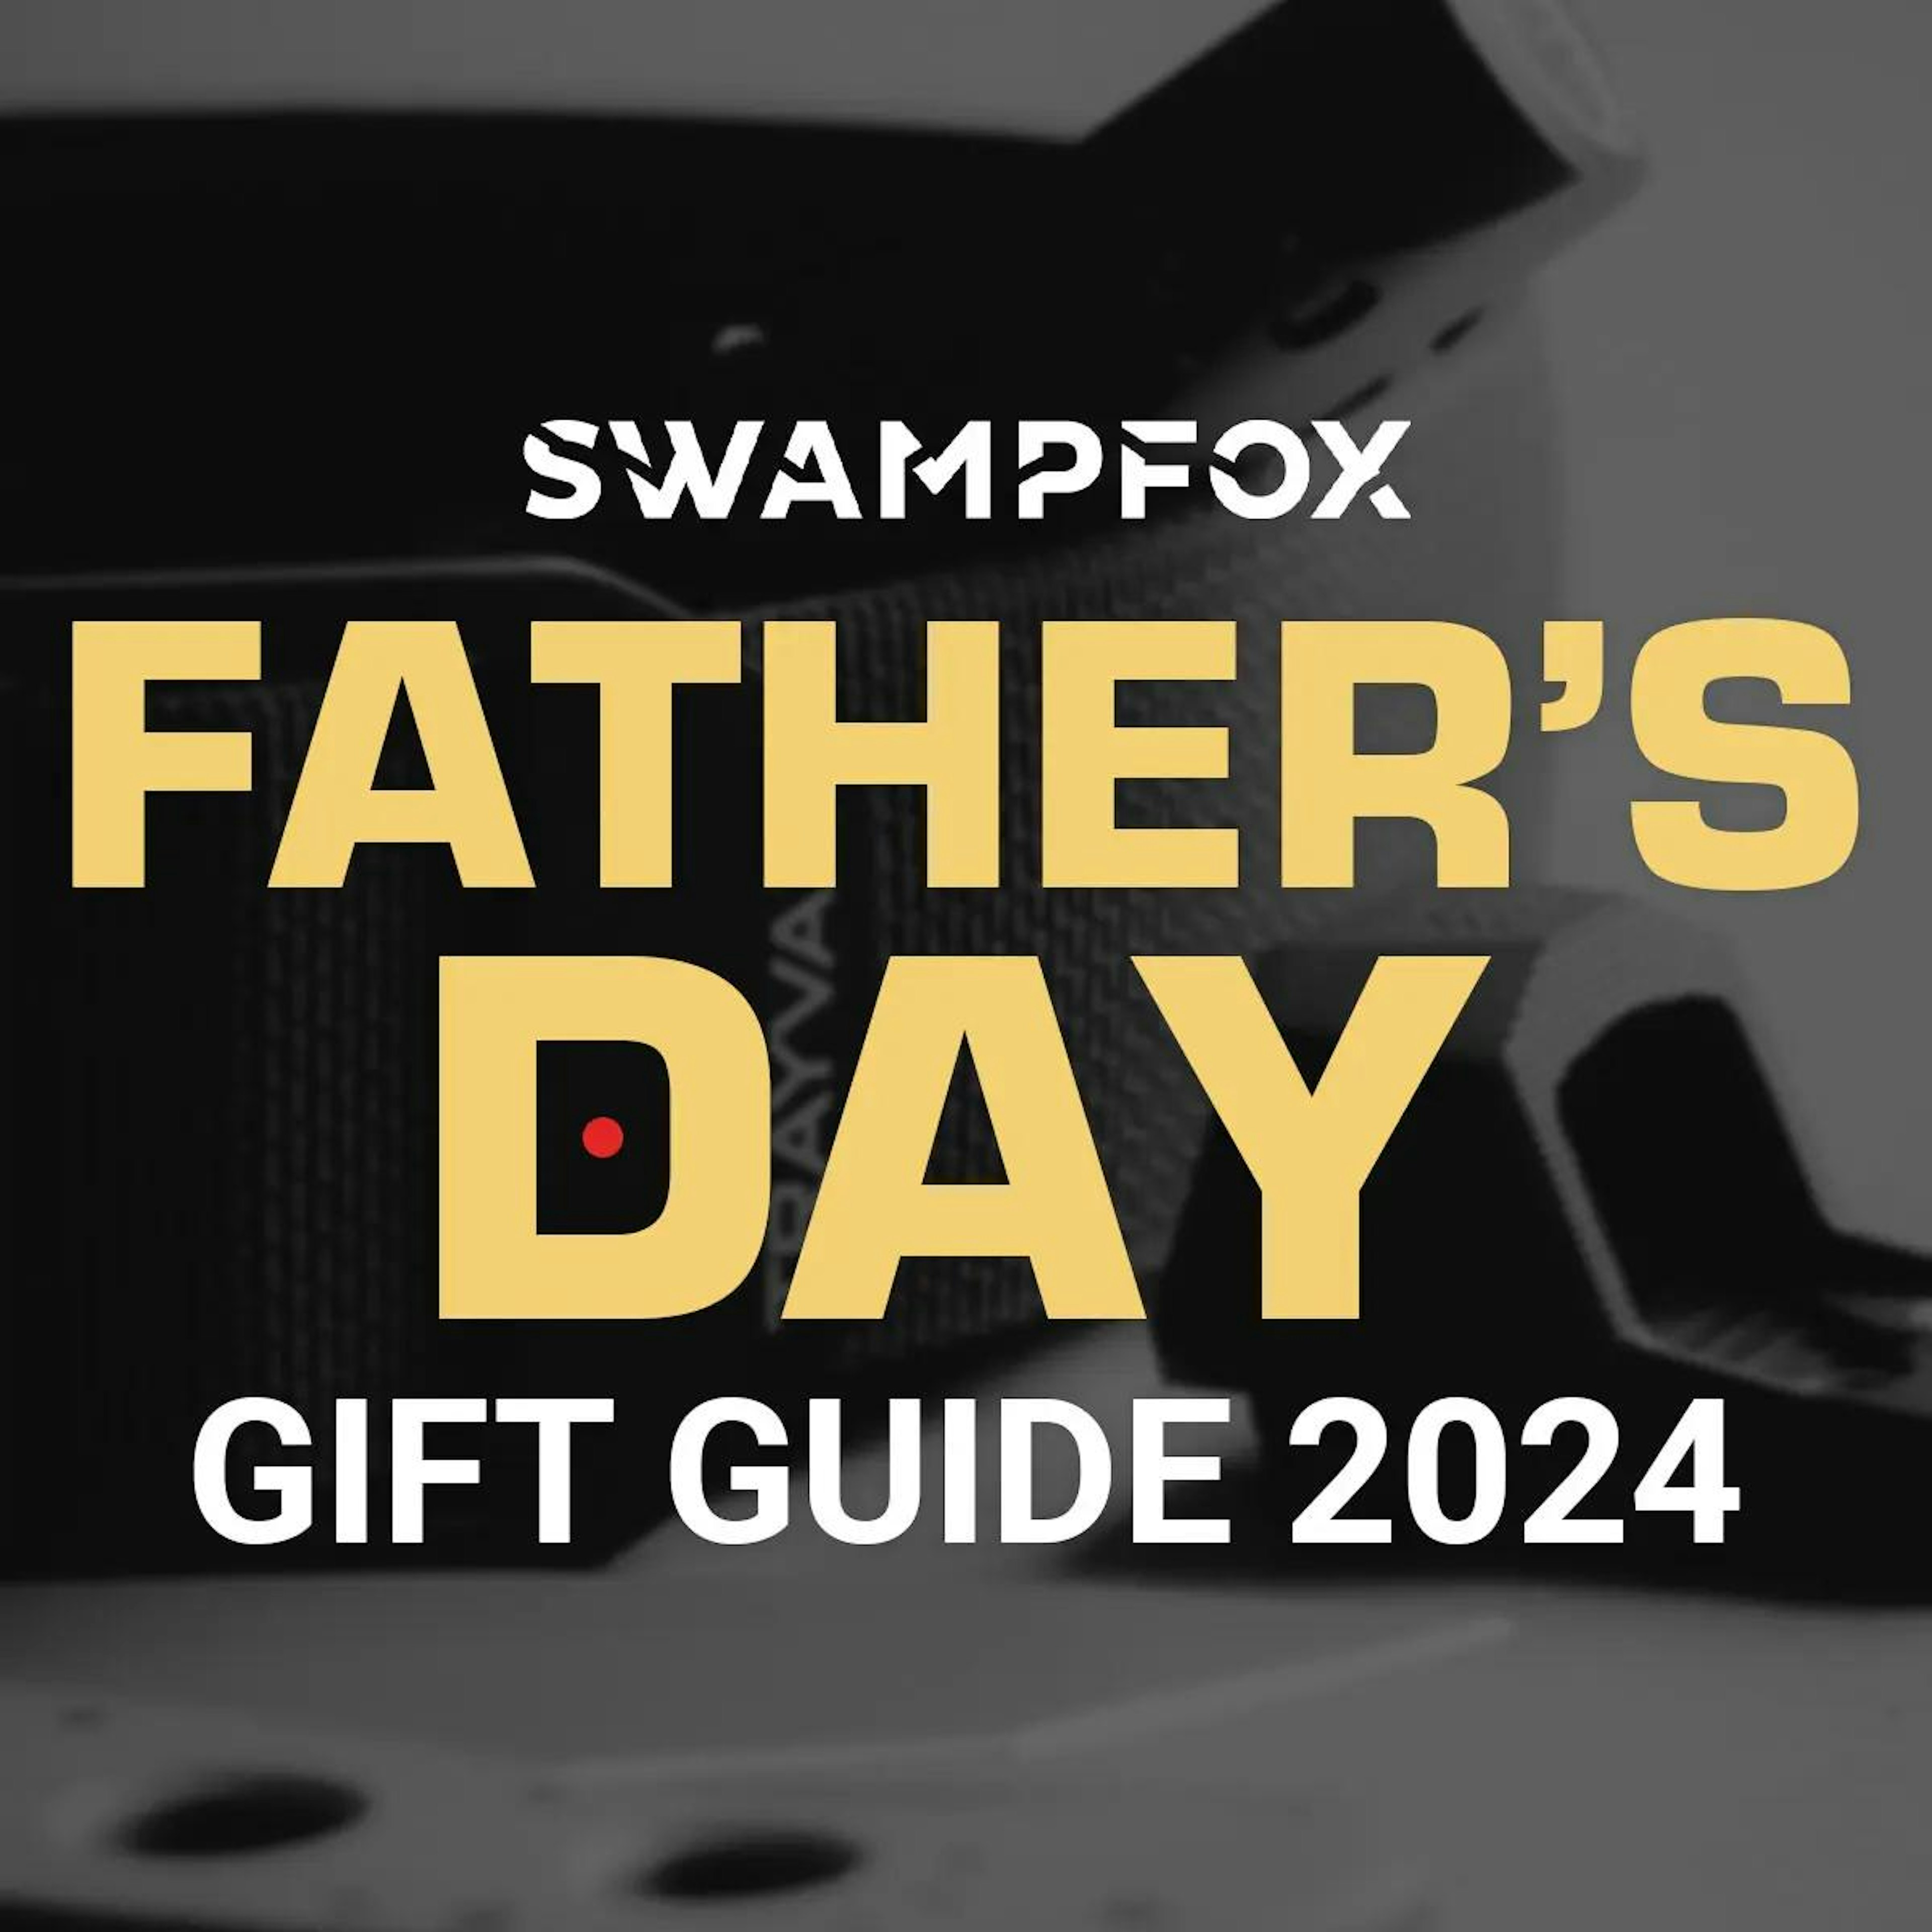 Swampfox Father’s Day Gift Guide 2024